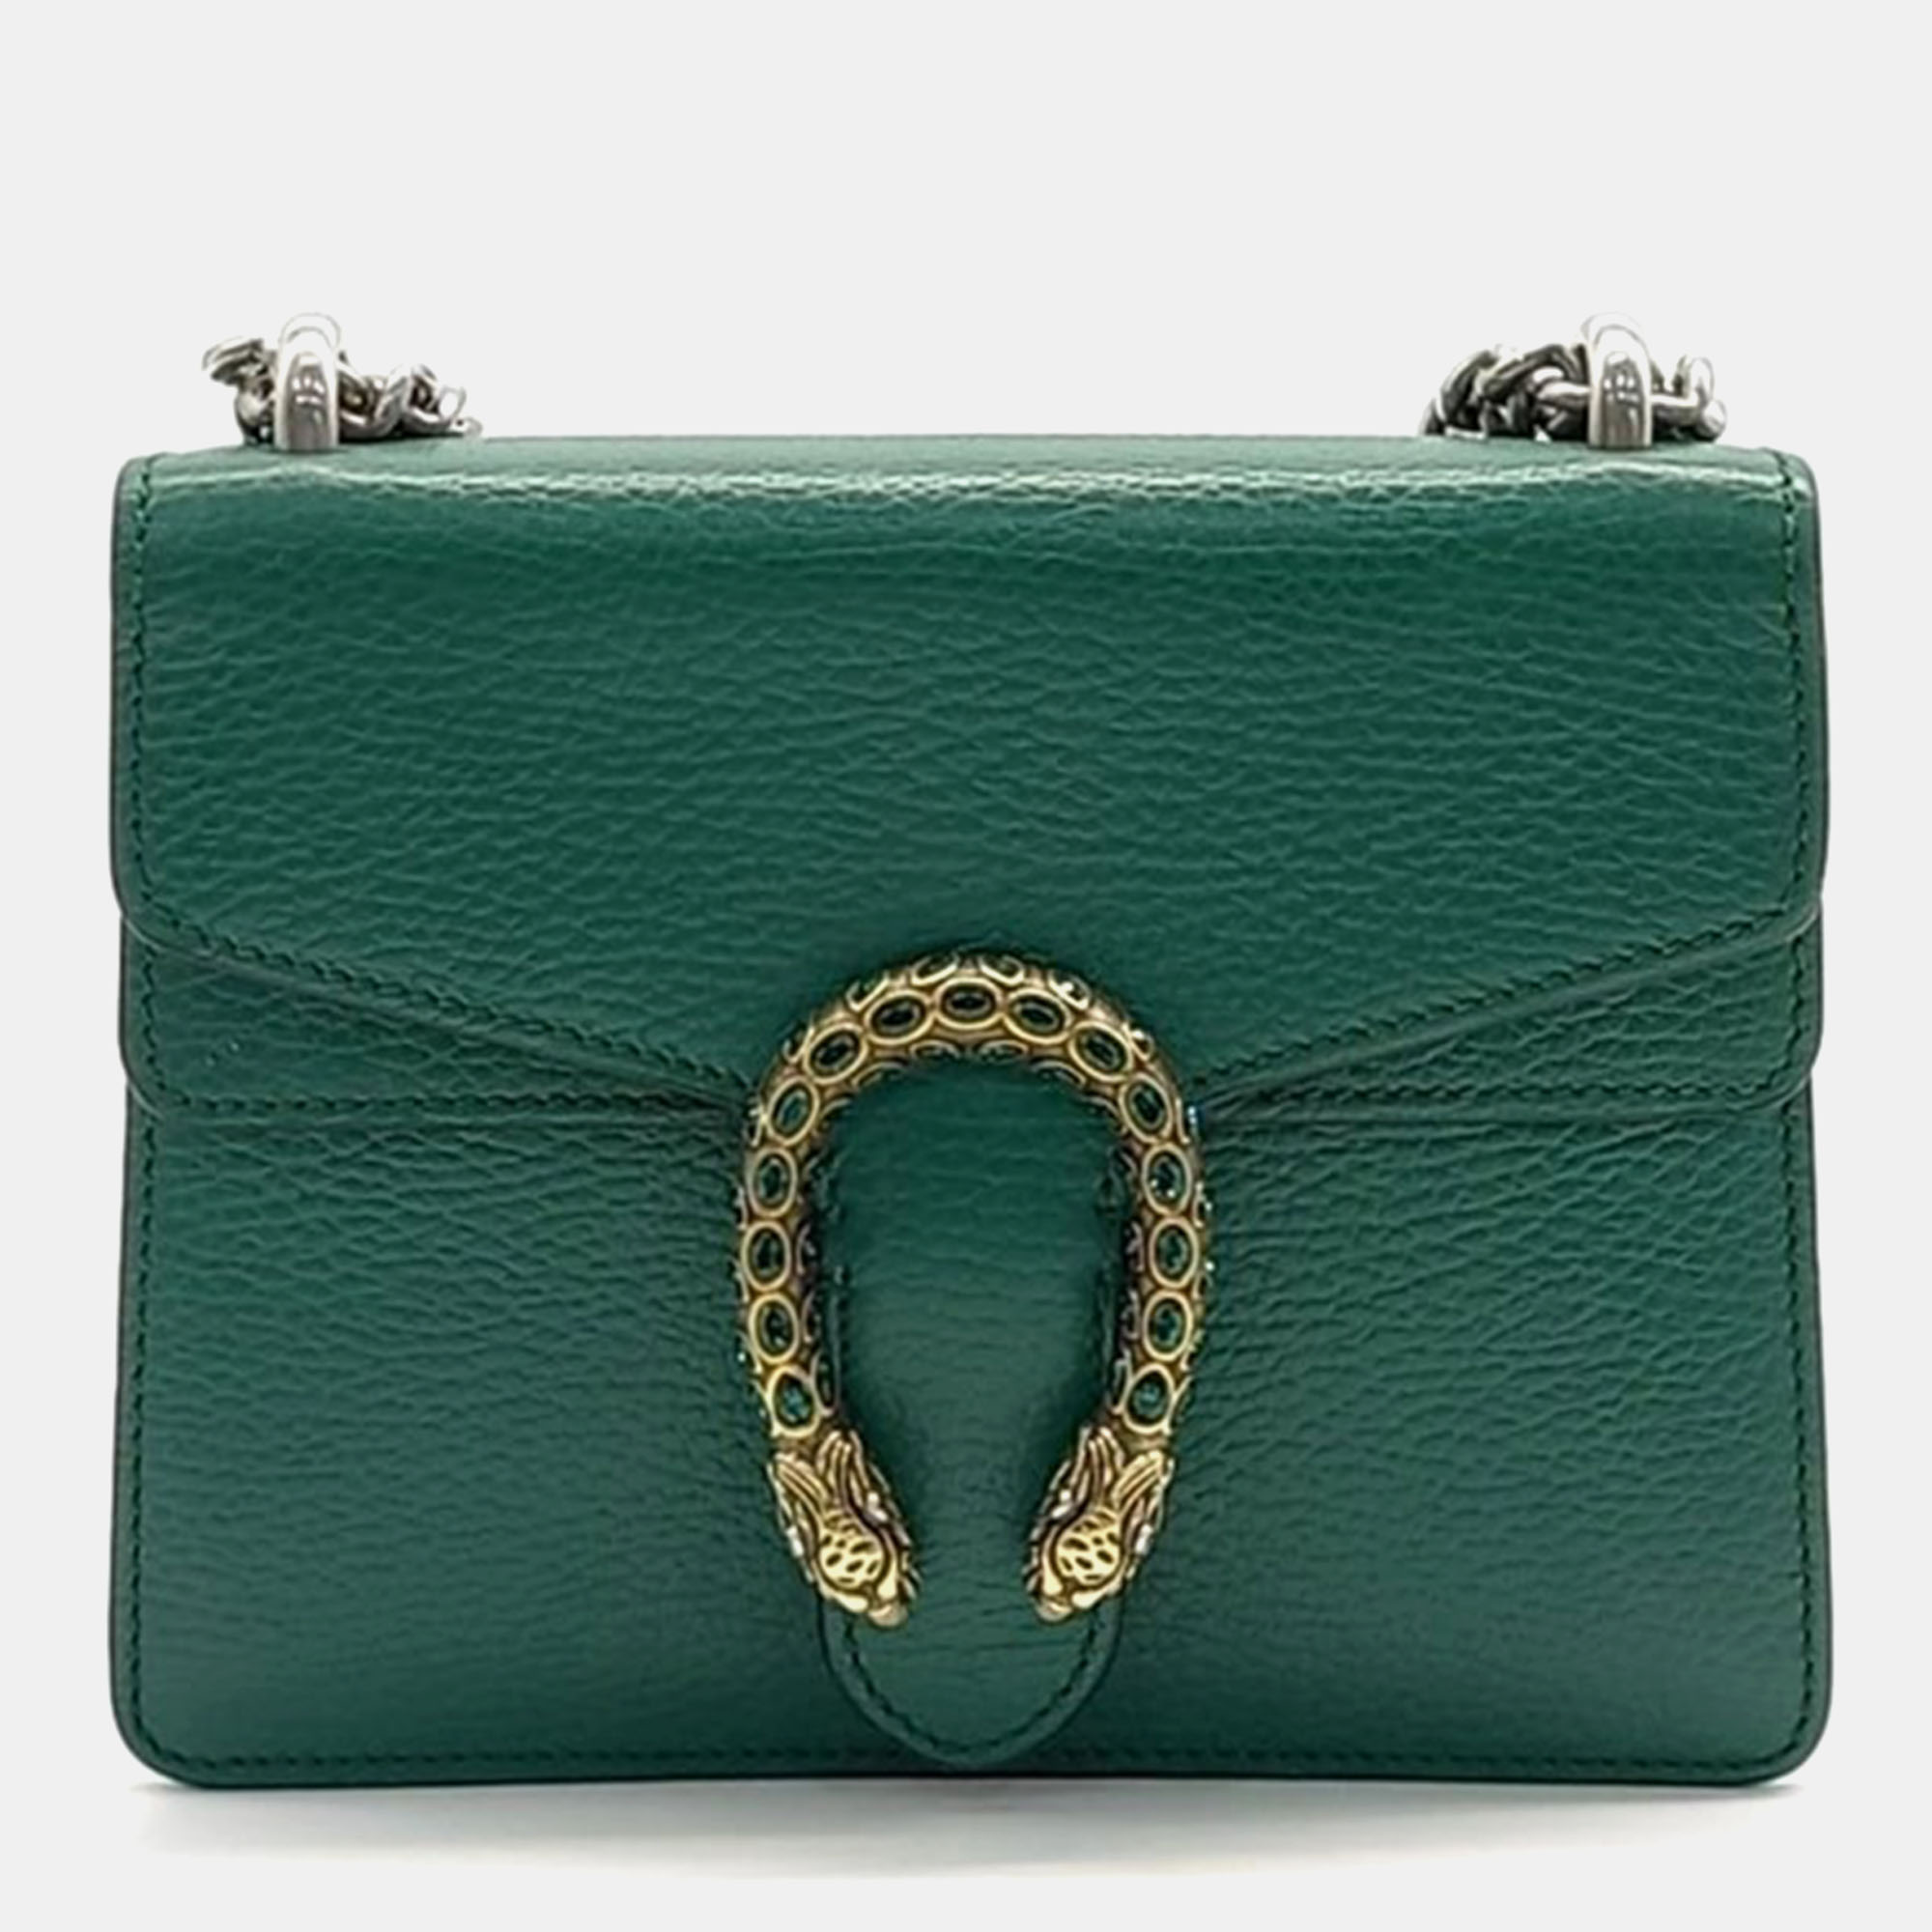 This Gucci elegant shoulder bag is perfect to enhance your everyday style. It is carefully sewn and finished to be a wonderful investment in your closet.